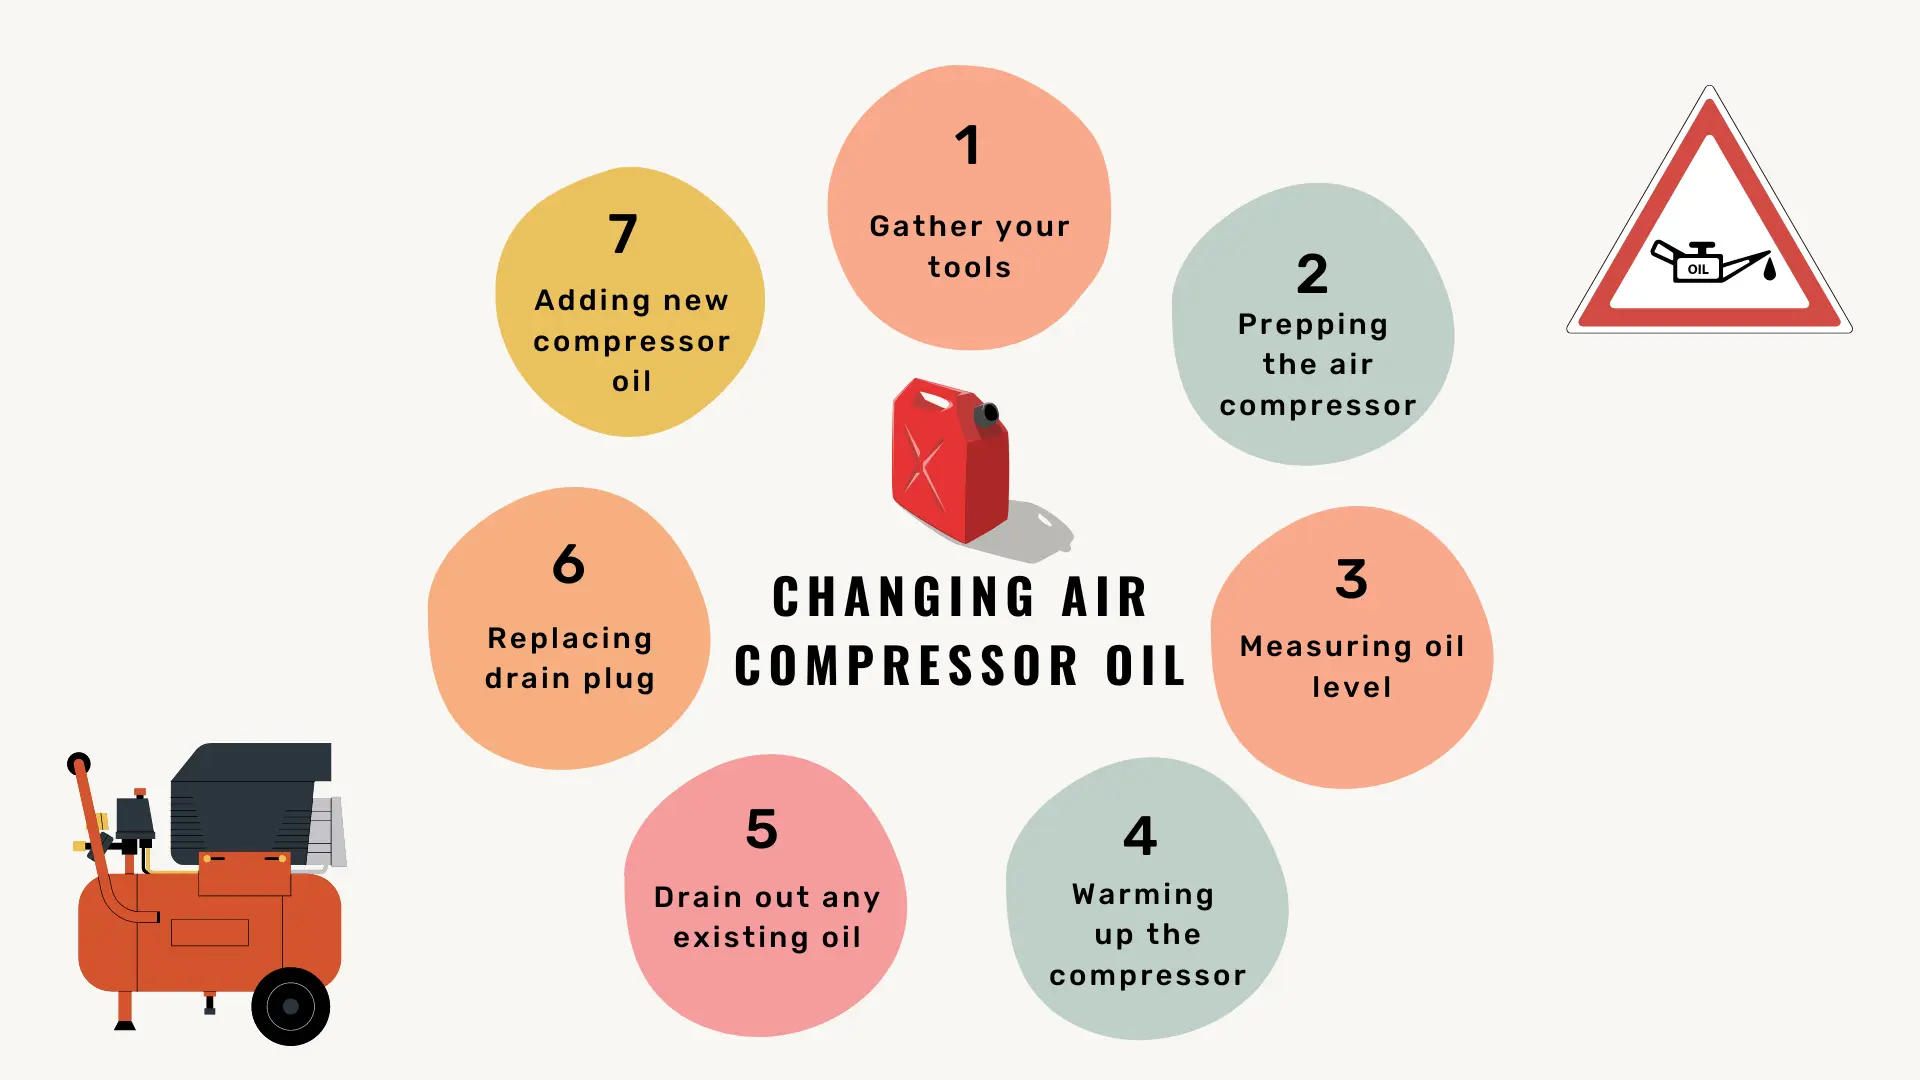 Steps to change the Air Compressor Oil